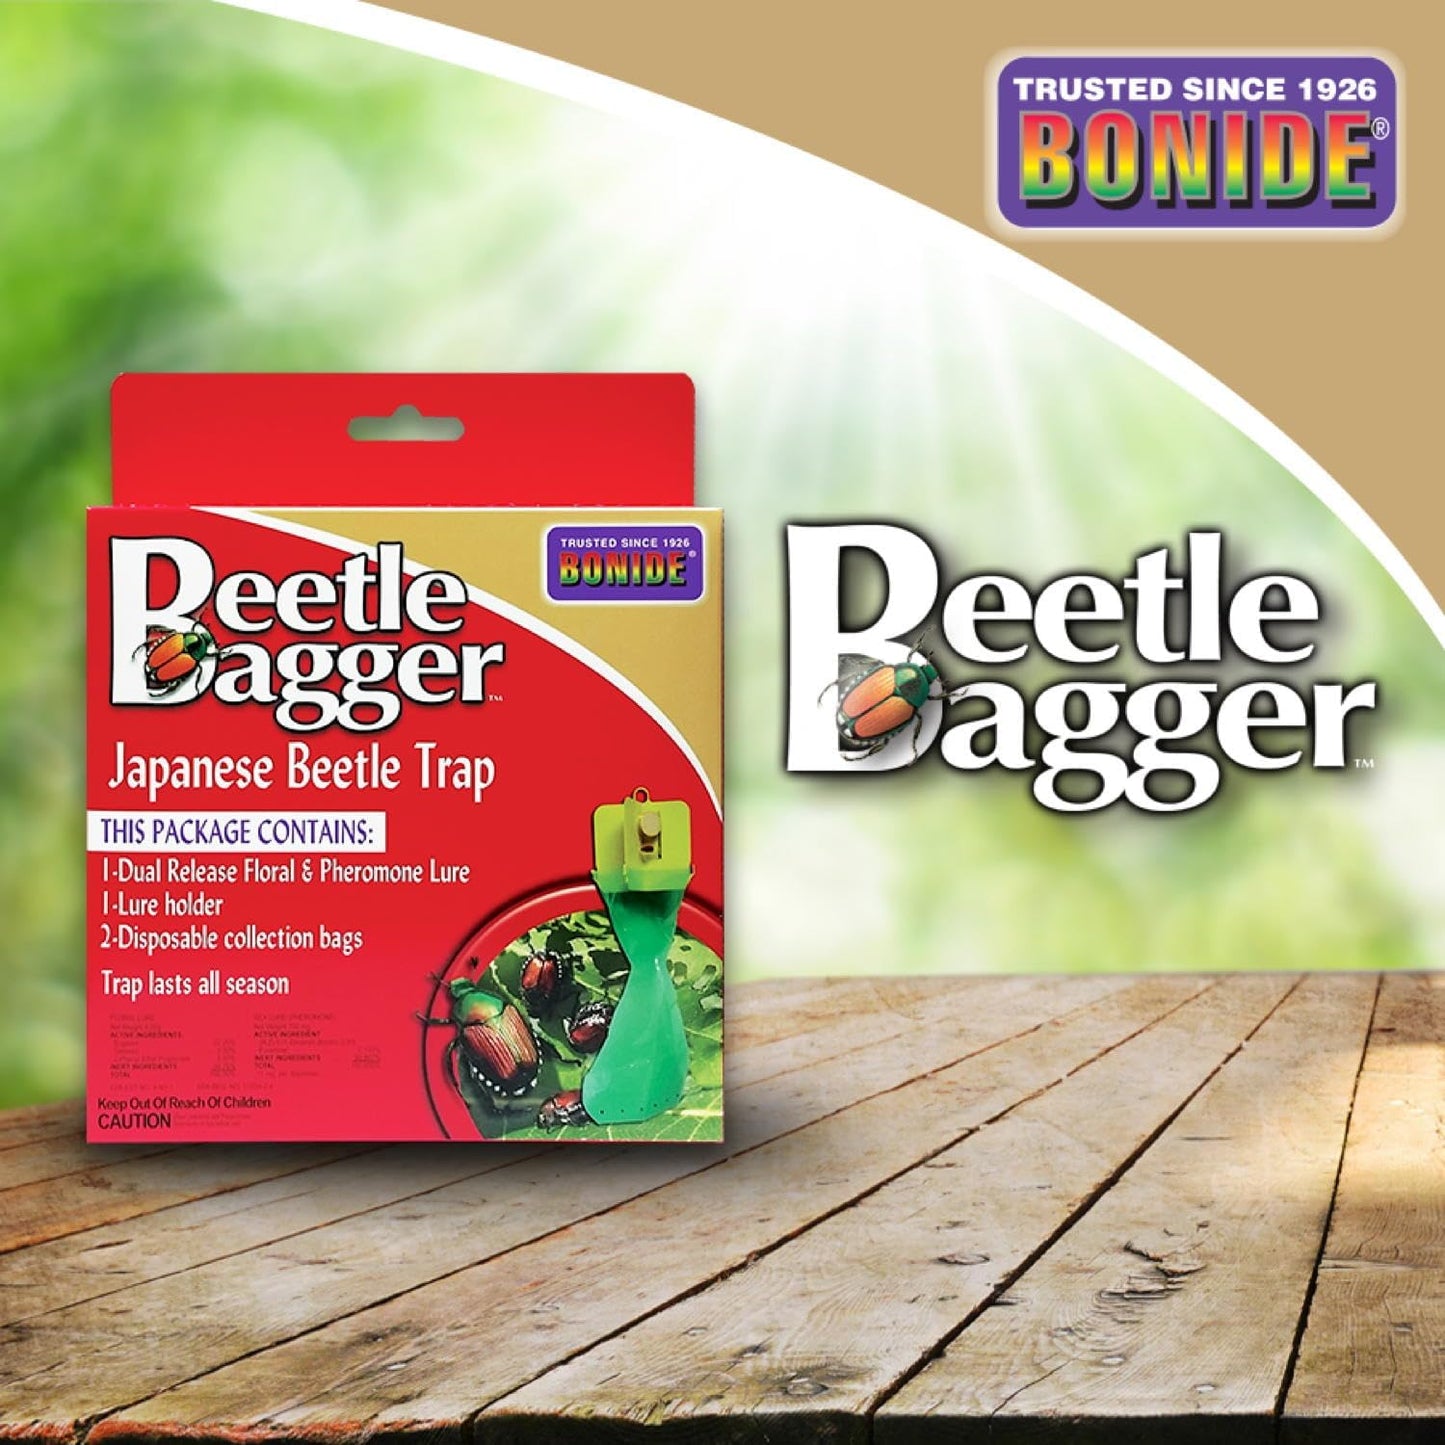 Bonide, Beetle Bagger Japanese Beetle Trap Kit for Indoors and Outdoors, 2 Disposable Collection Bags Included